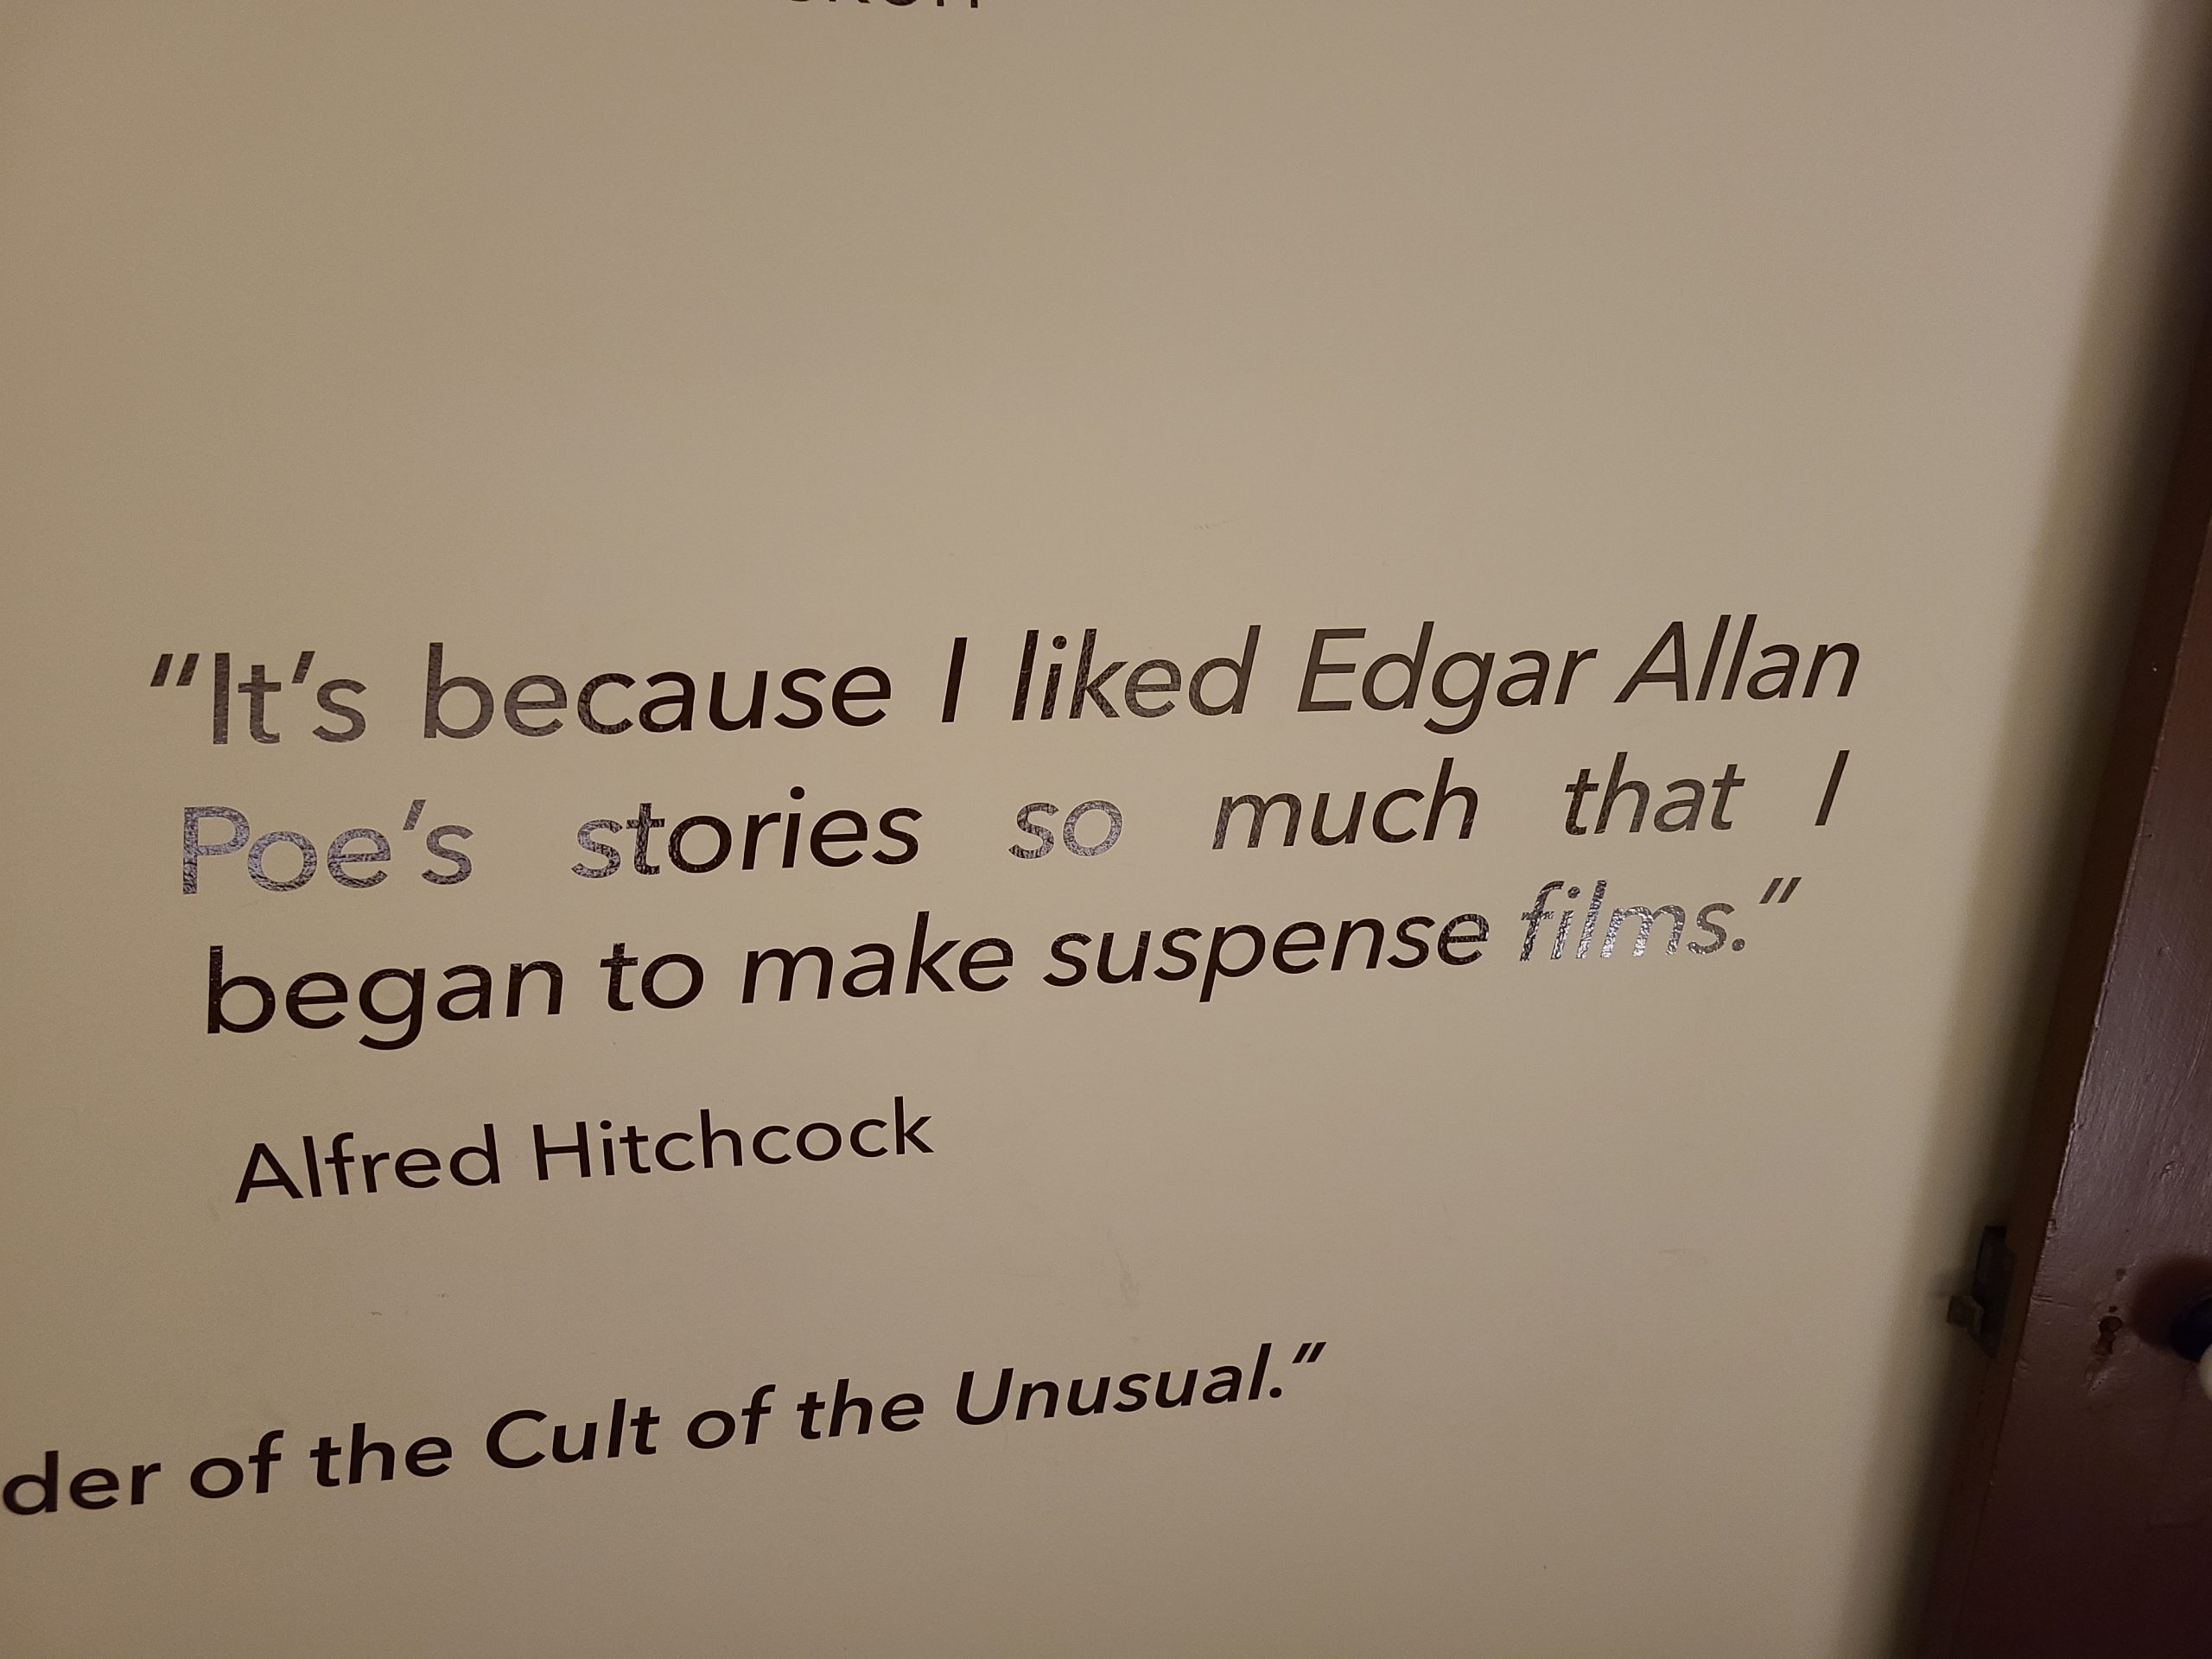 A quote from Alfred Hitchcock featured on the museum wall